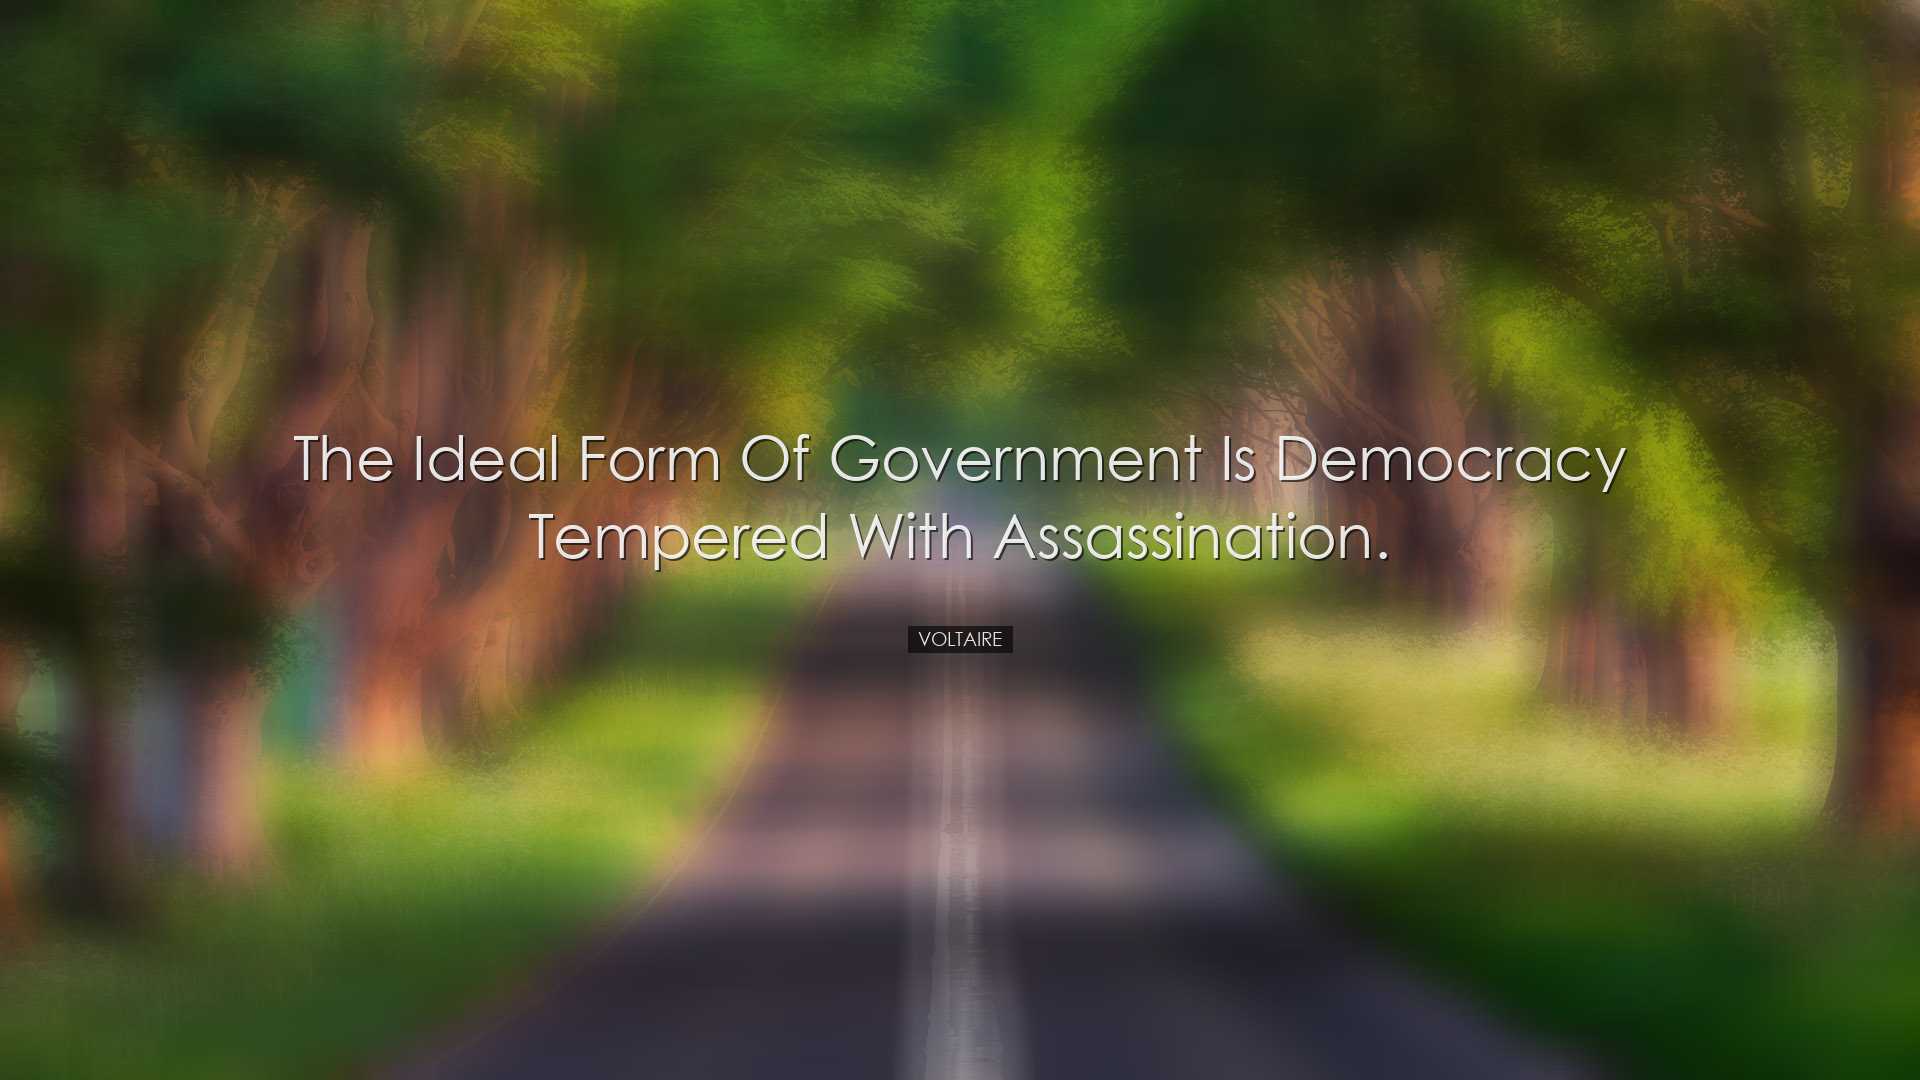 The ideal form of government is democracy tempered with assassinat